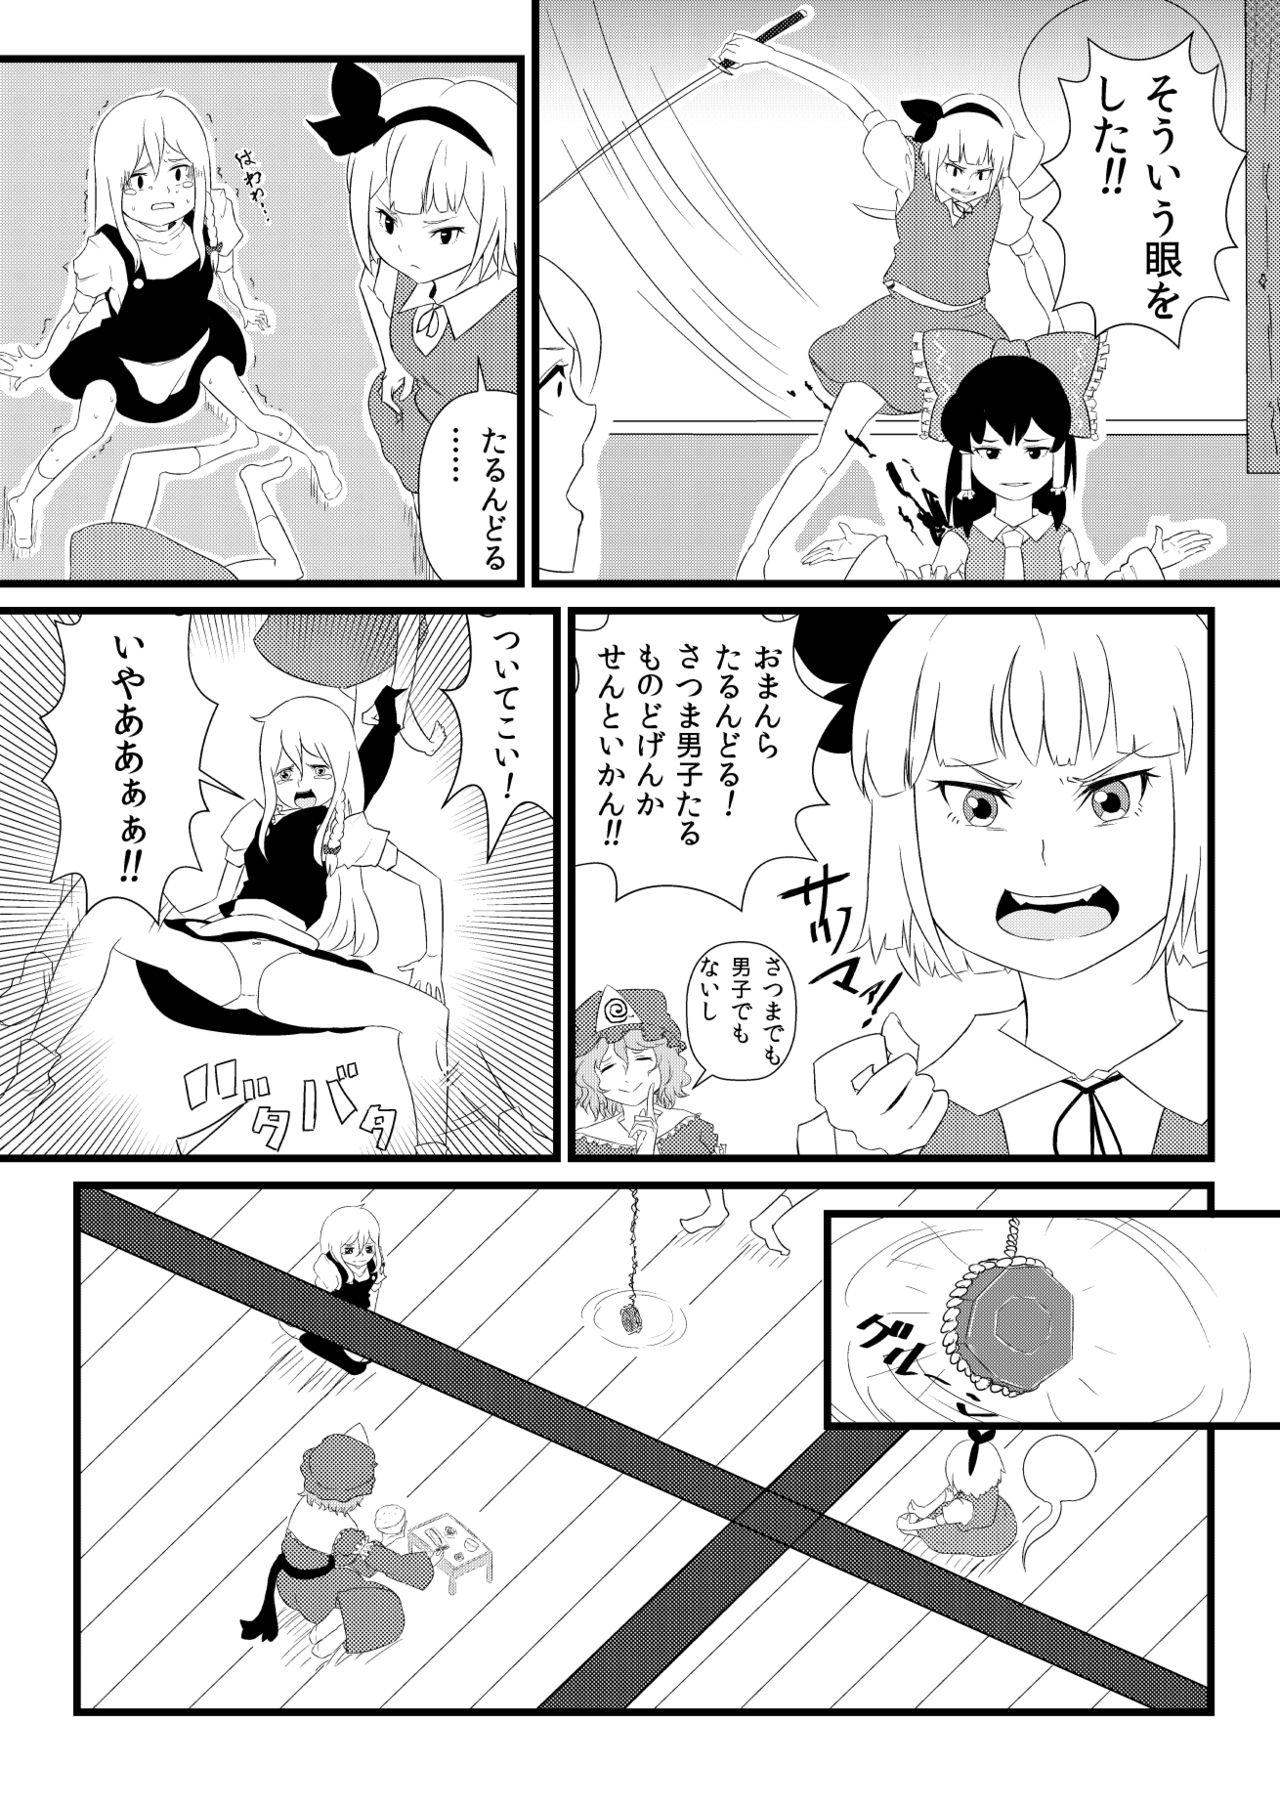 Smalltits 東方板としあき合同誌5 - Touhou project Spain - Page 3